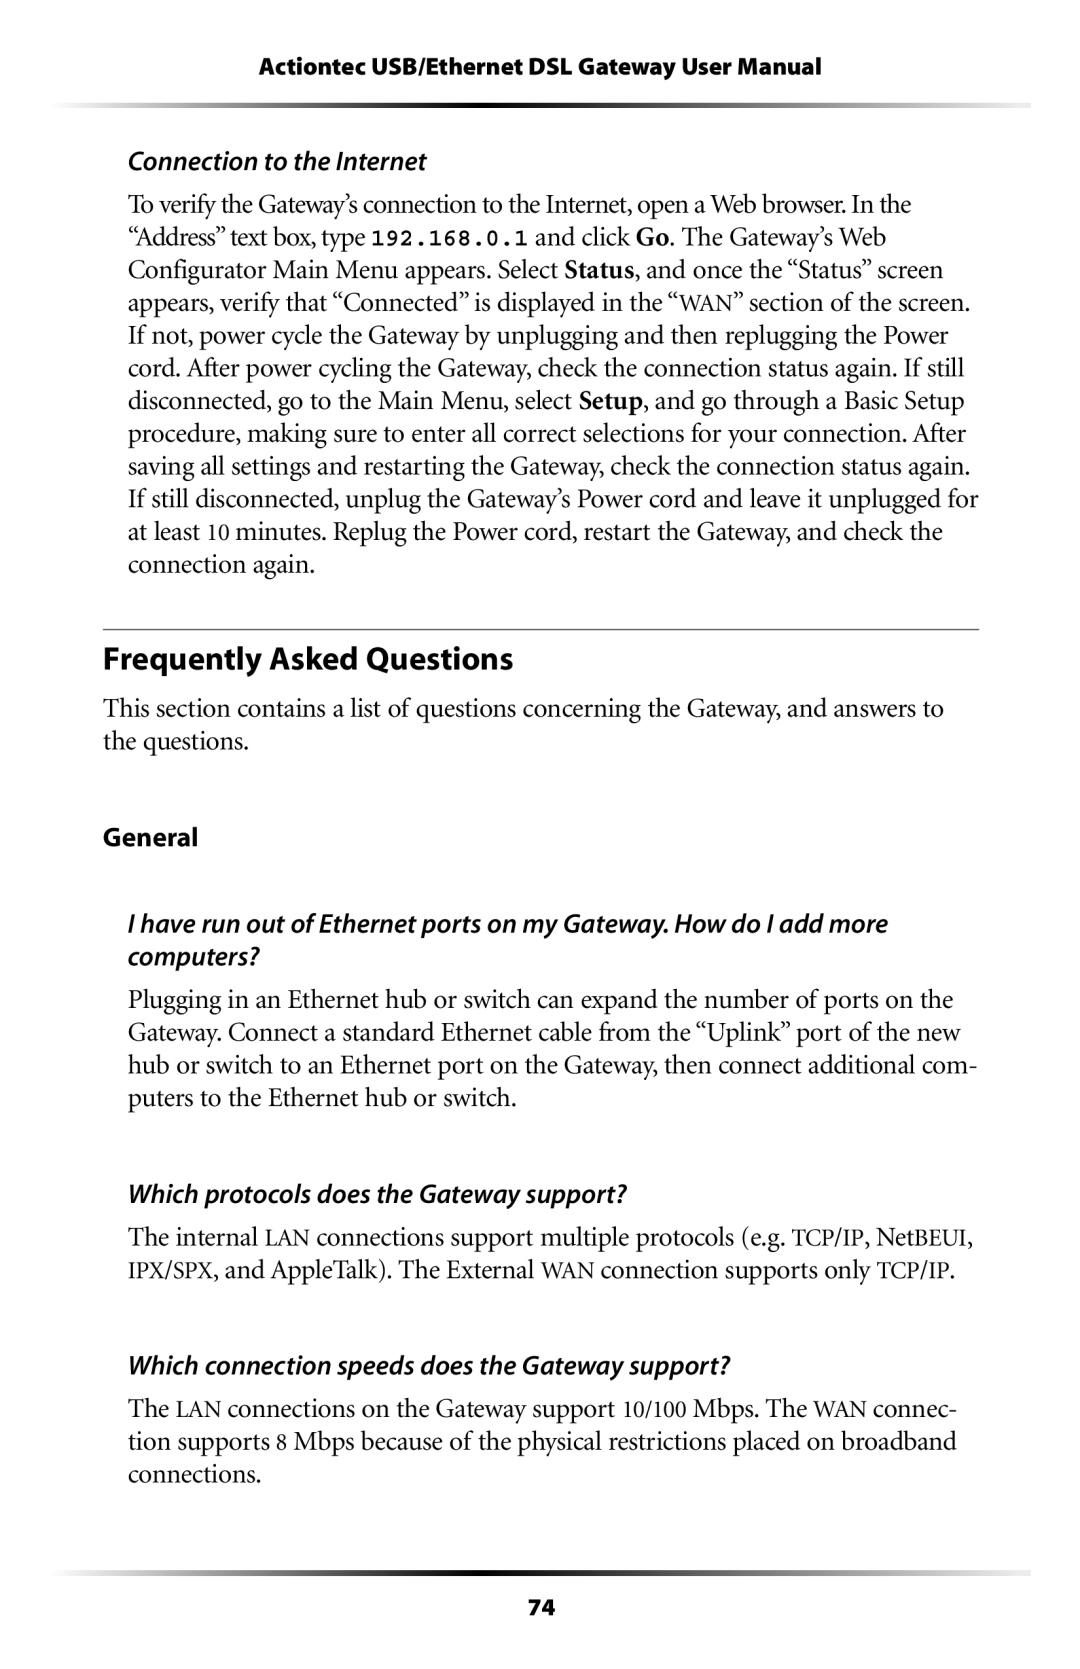 Gateway GT704 user manual Frequently Asked Questions, Connection to the Internet, Which protocols does the Gateway support? 